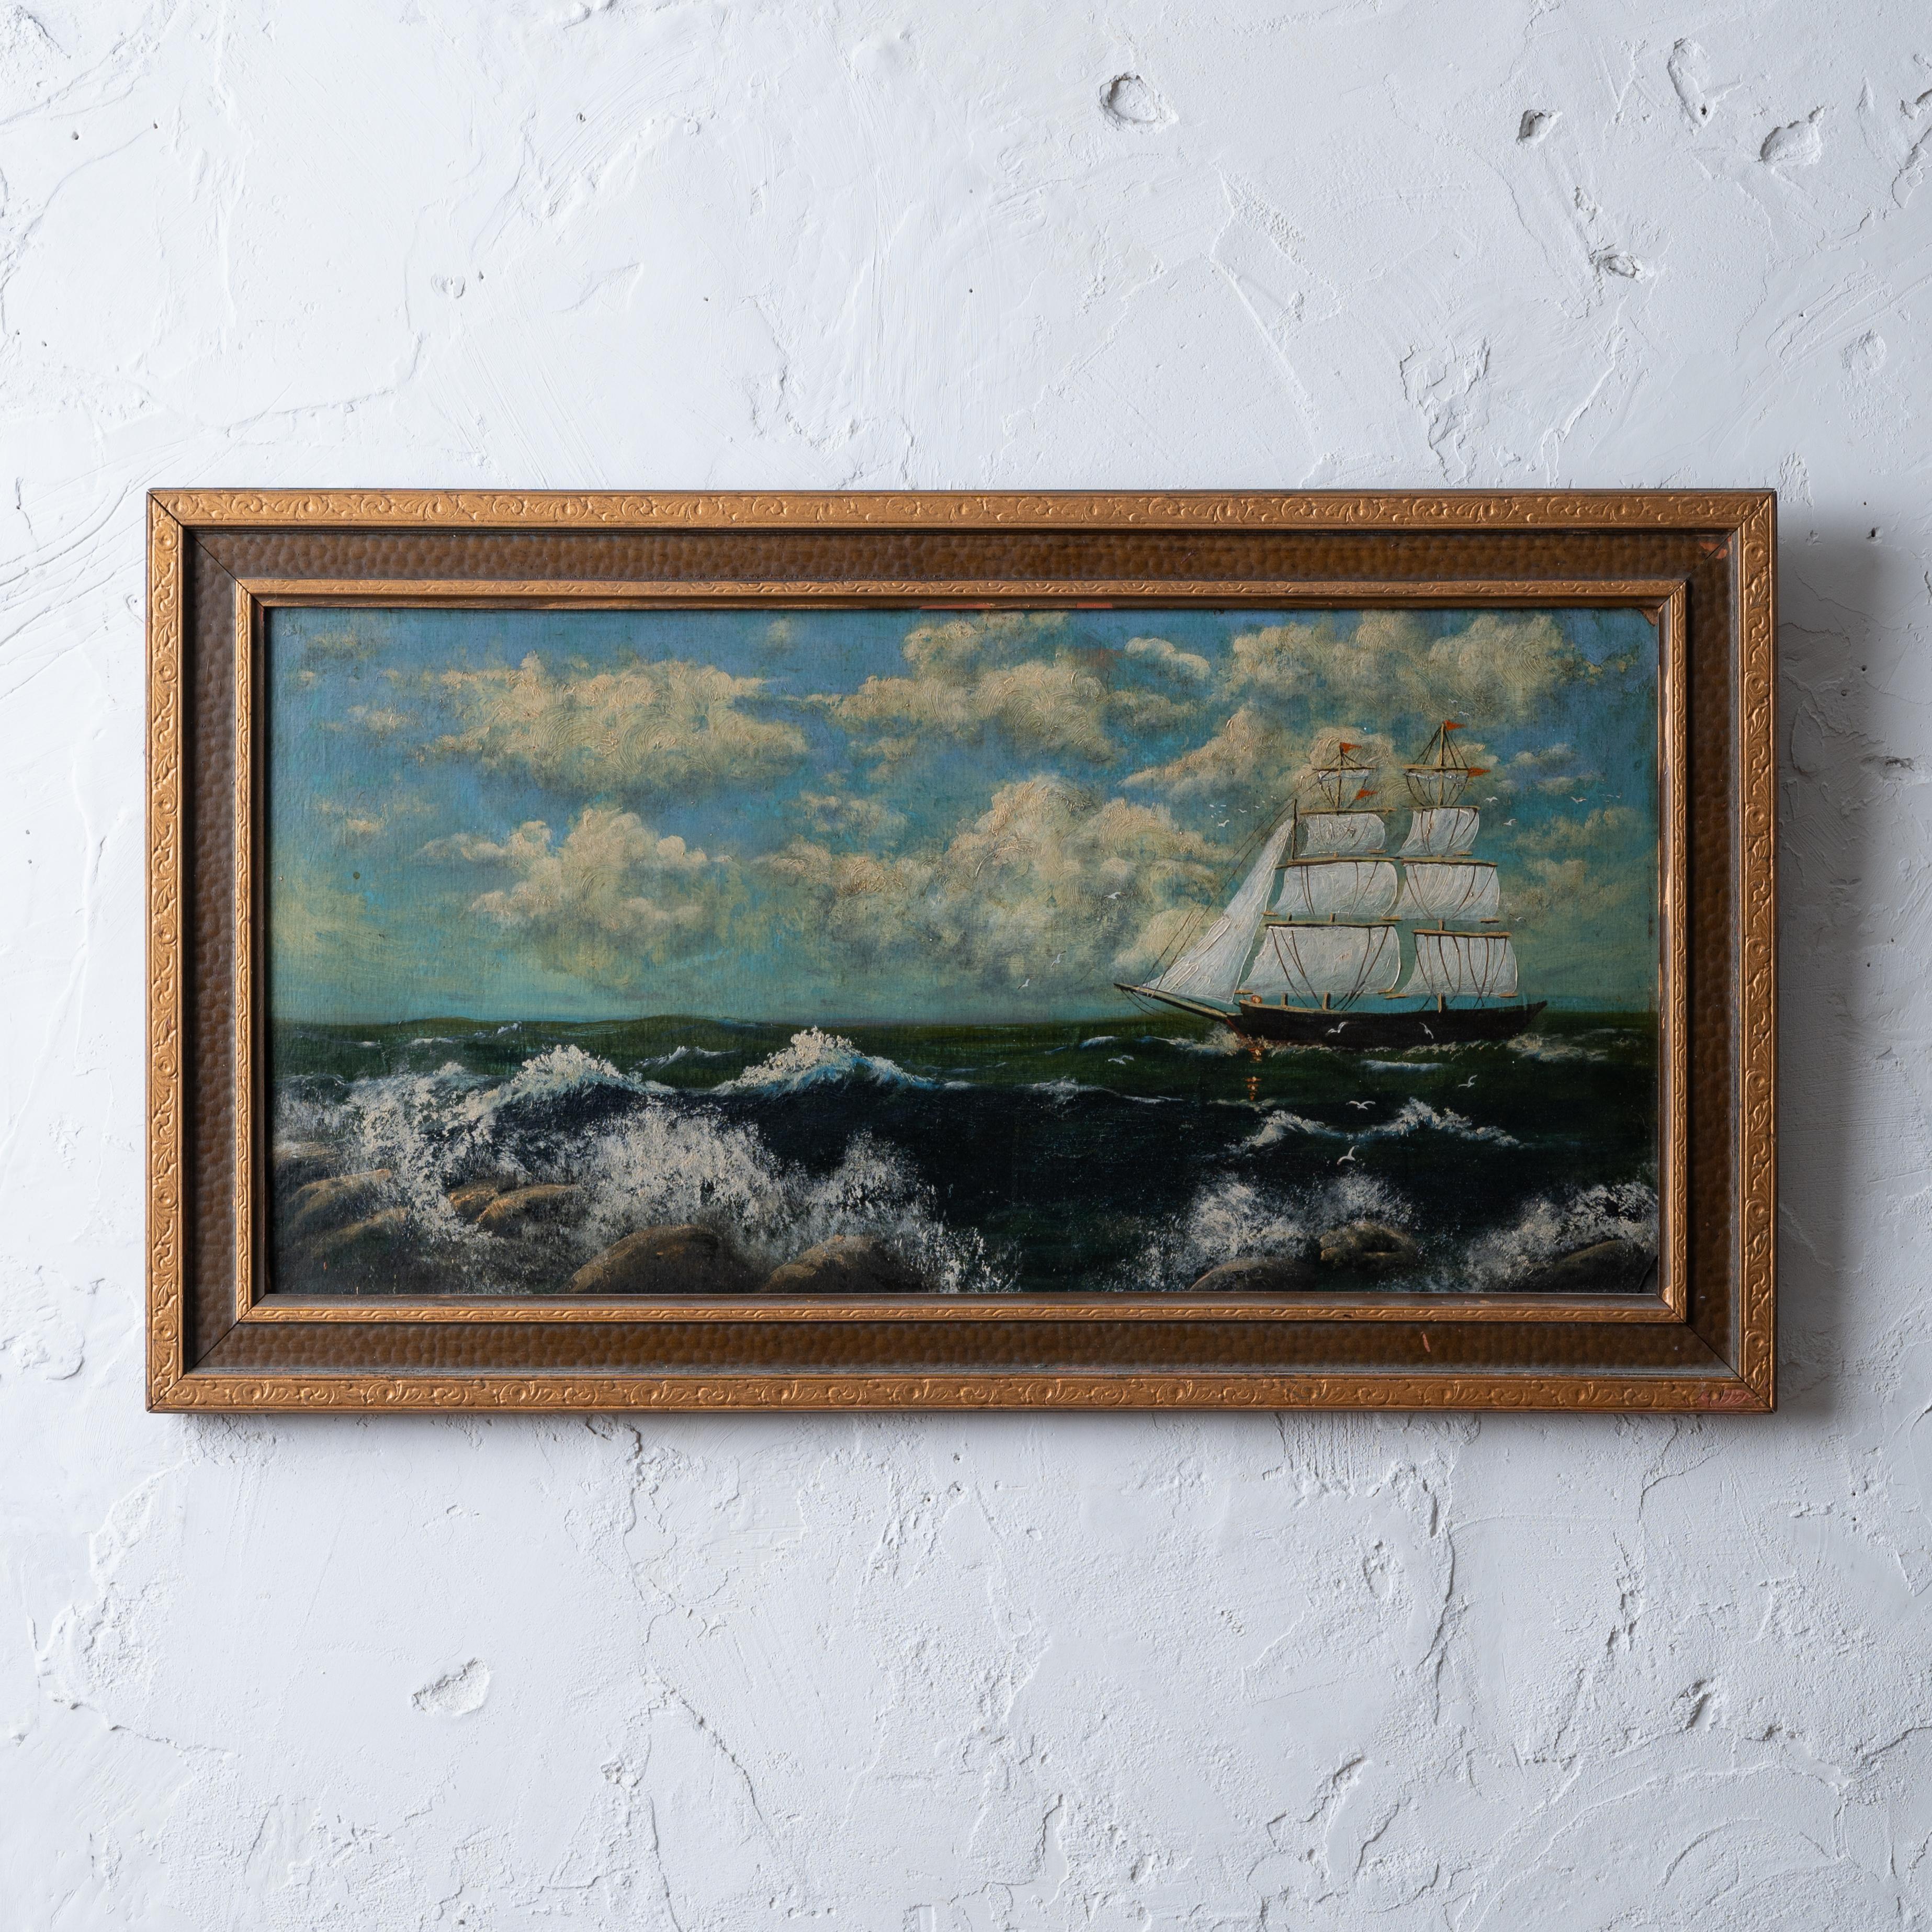 A folk art ship oil on board, painted by Mrs. E.O. Ricks (Bettie Tully Ricks, 1879-1959) of Alabama in 1927.  

27 ¾ by 15 ¾ inches


